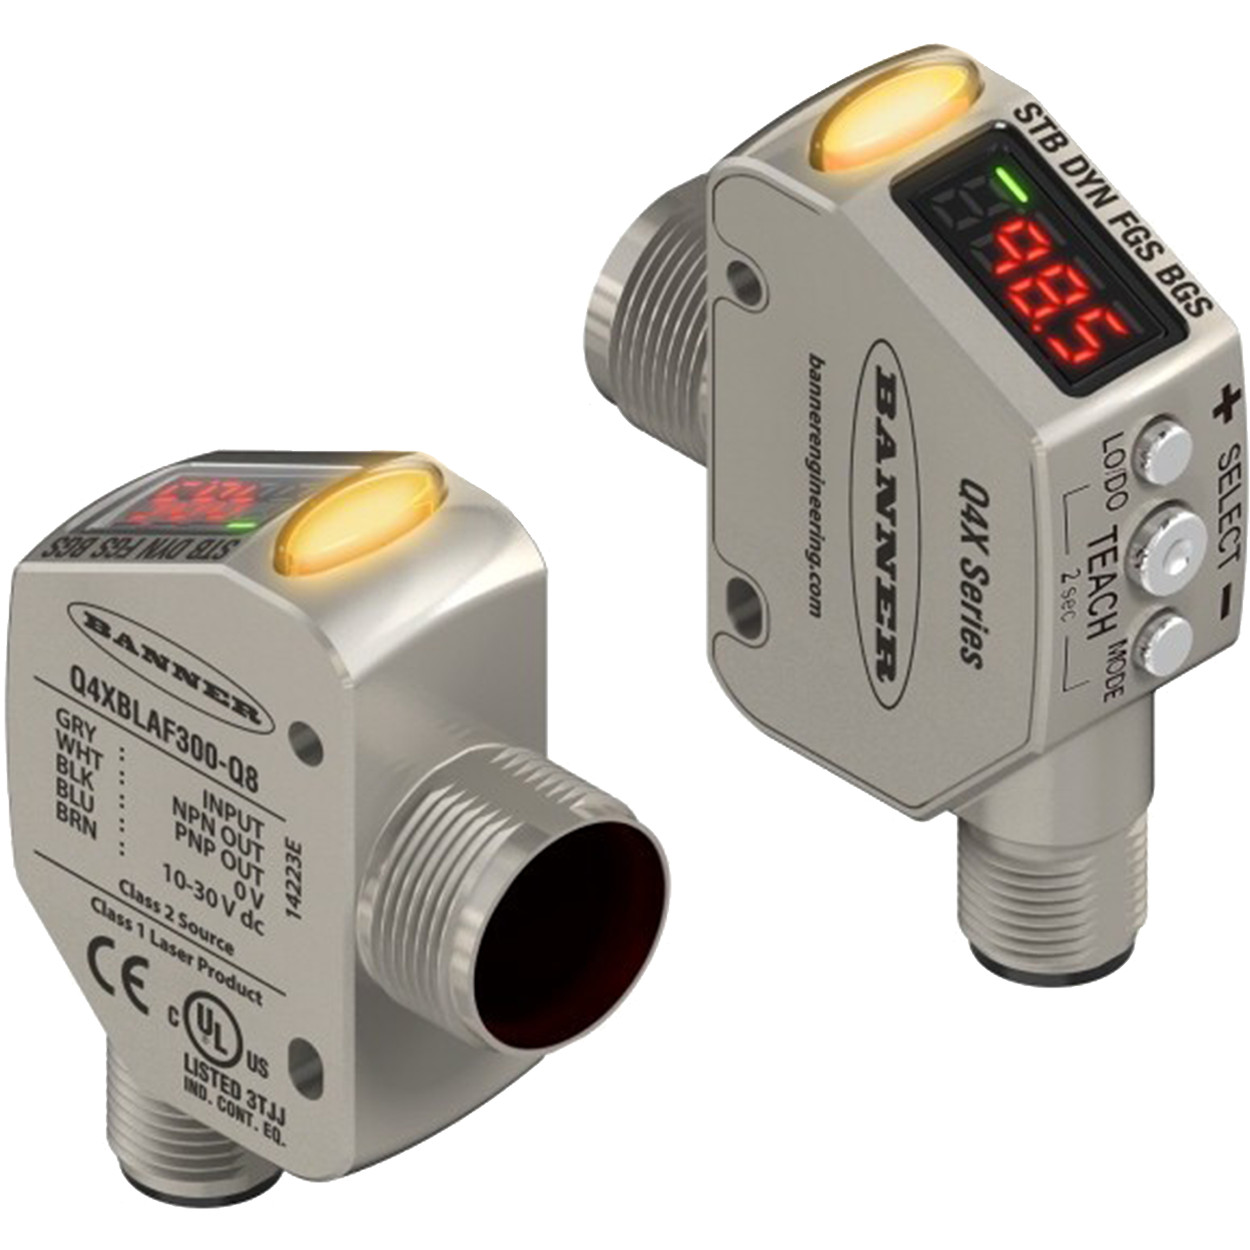 BANNER Q4X STAINLESS STEEL LASER SENSOR WITH DUAL DISCRETE OUTPUTS AND IO-LINK